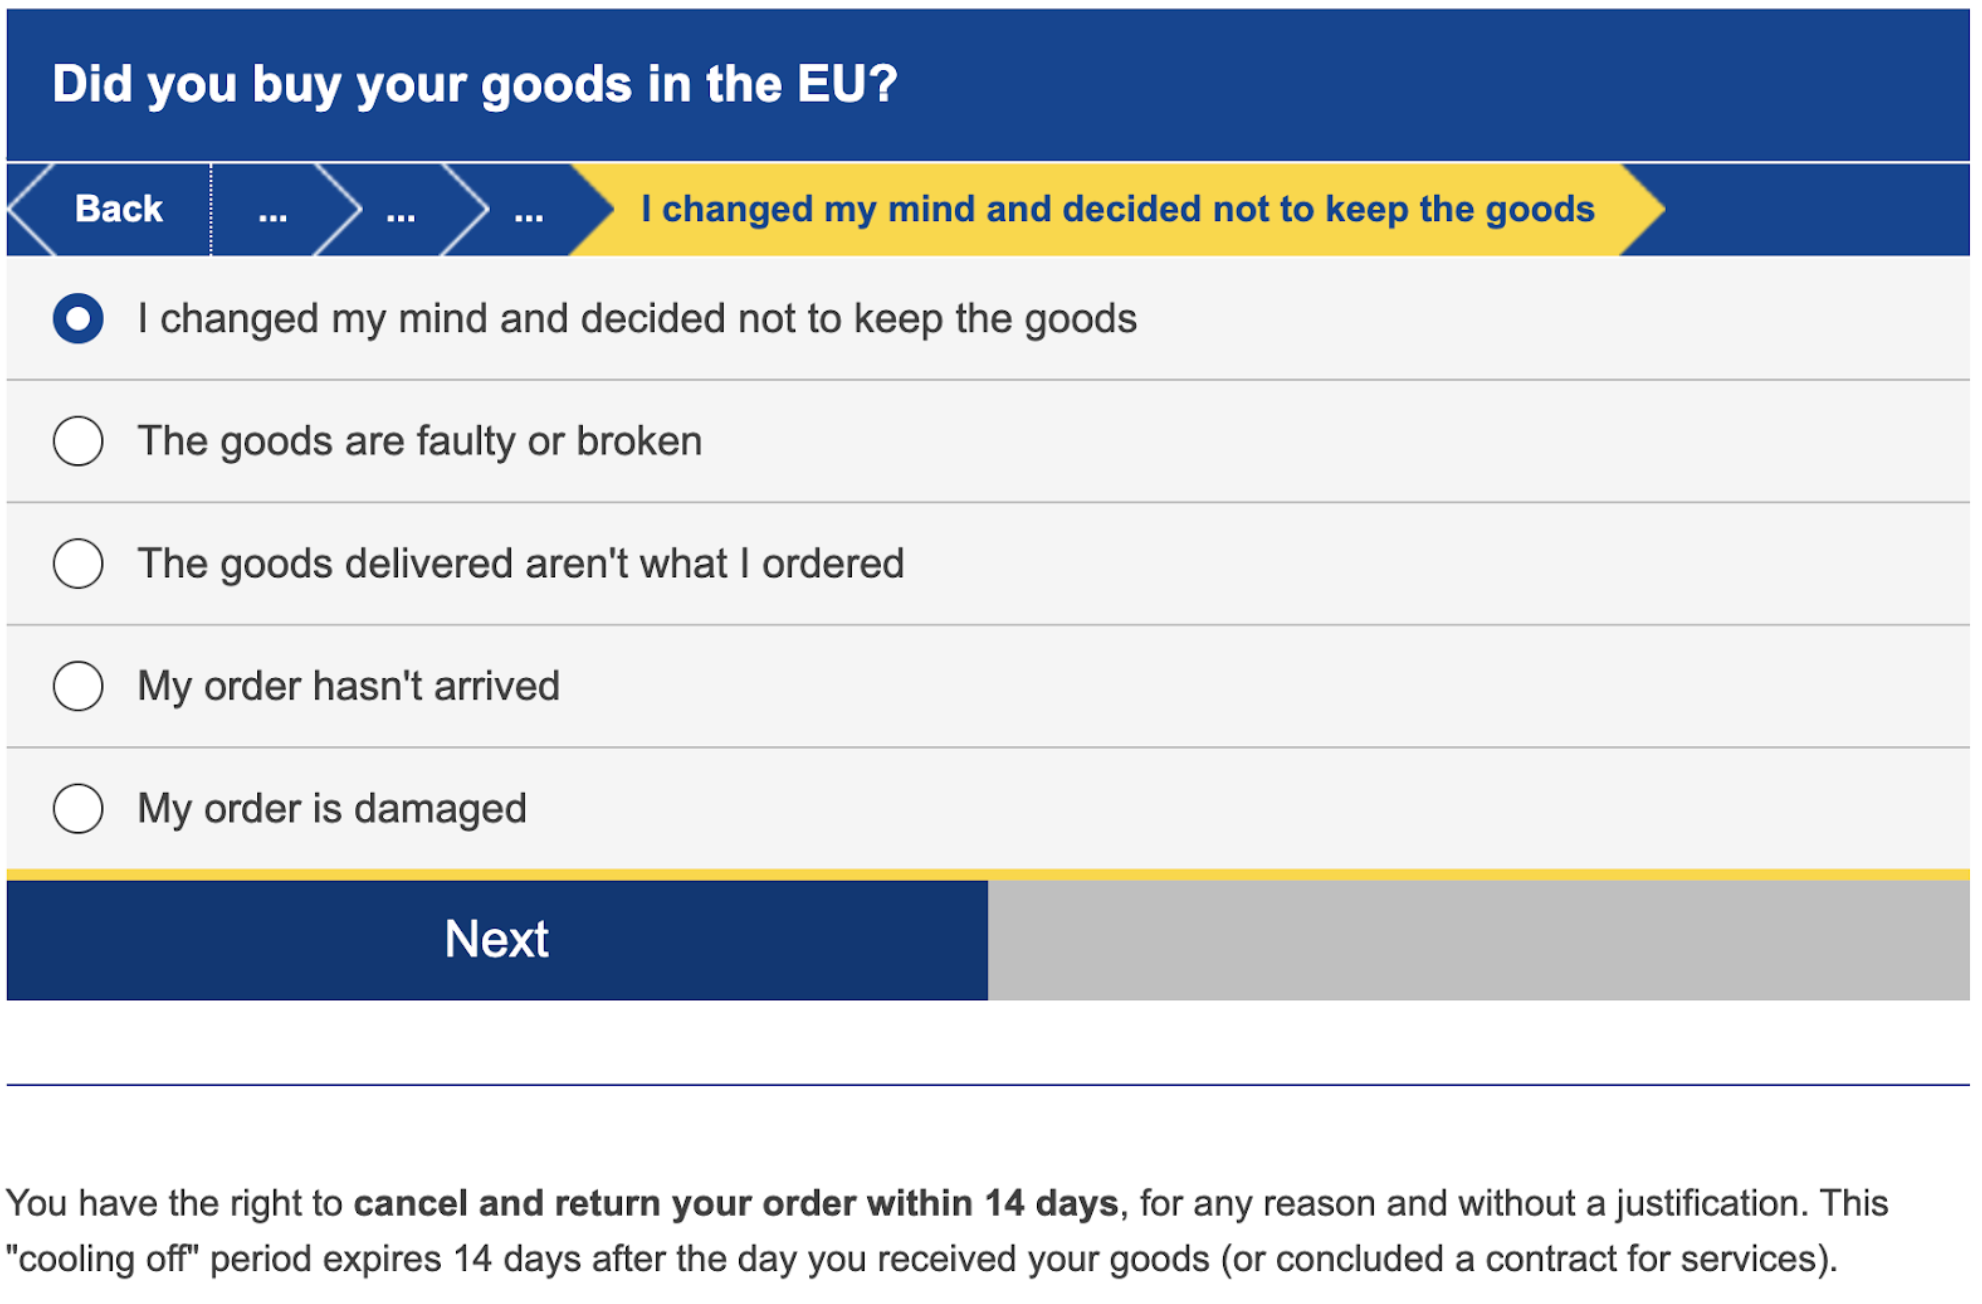 Snap shot of a digital tool that helps consumers understand their rights when they buy in the EU. The tool helps the consumer with information on their rights when things go wrong with the purchases.